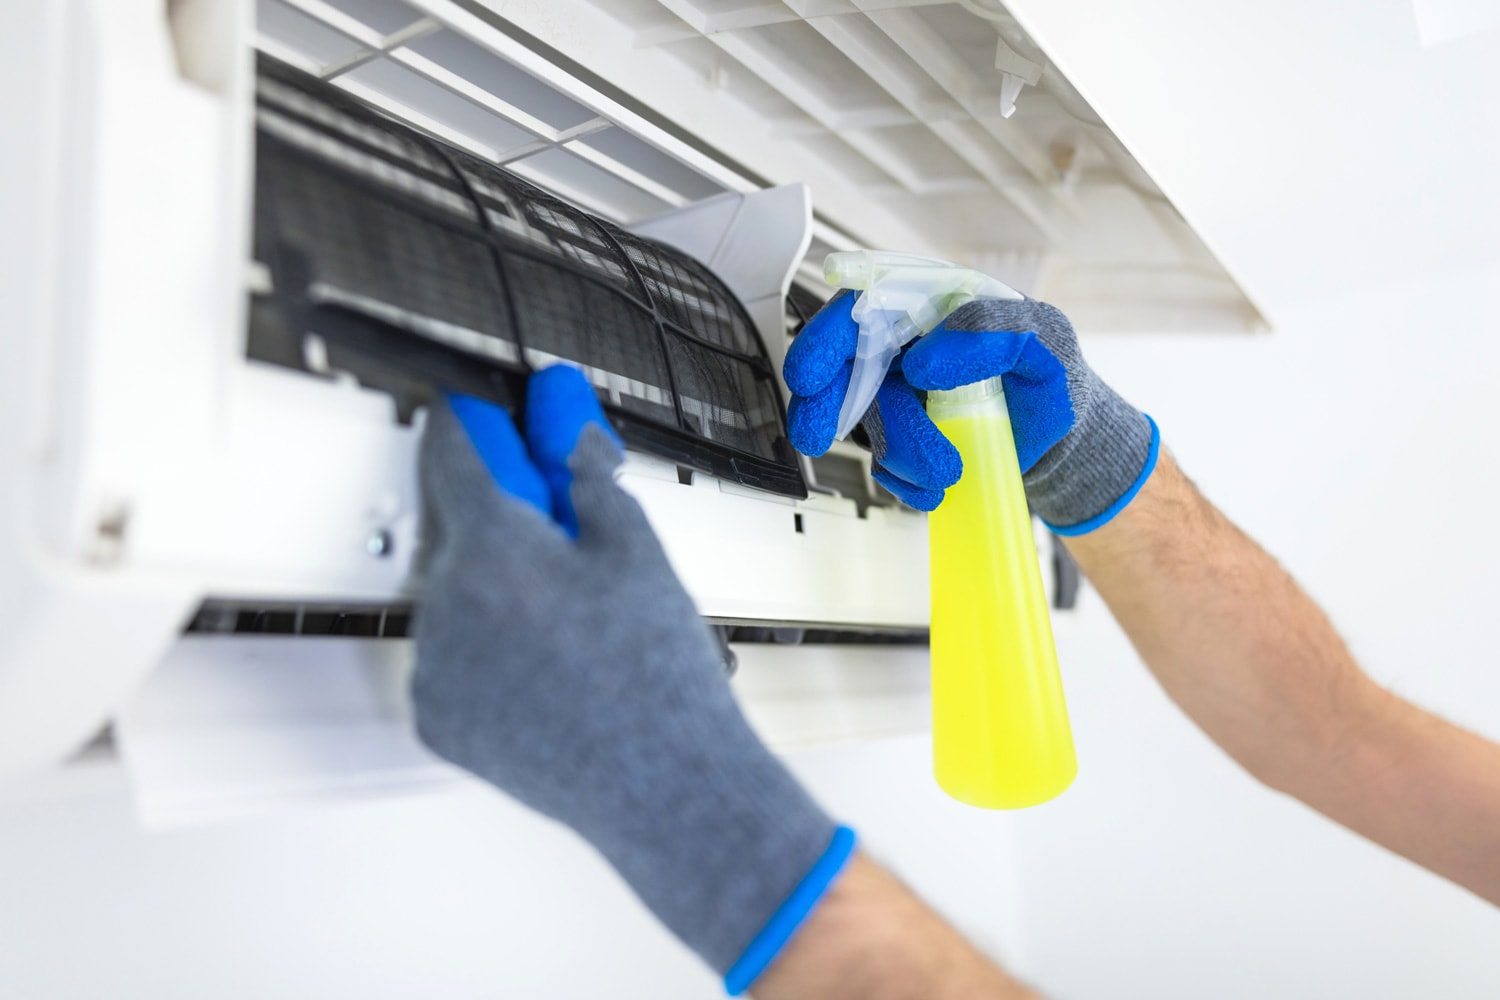 aircondition service and maintenance, fixing AC unit and cleaning the filters